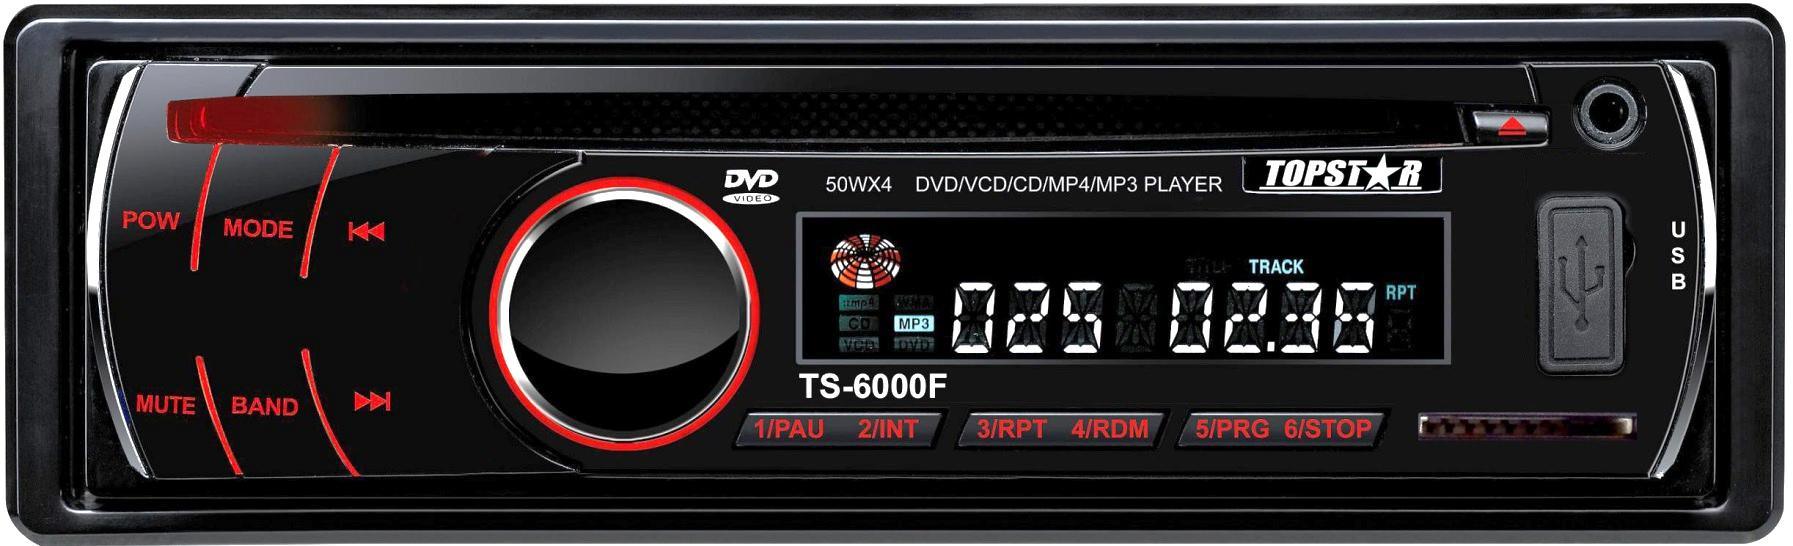 Auto Stereo One DIN Fixed Panel Car DVD Player with USB/SD/MMC Port